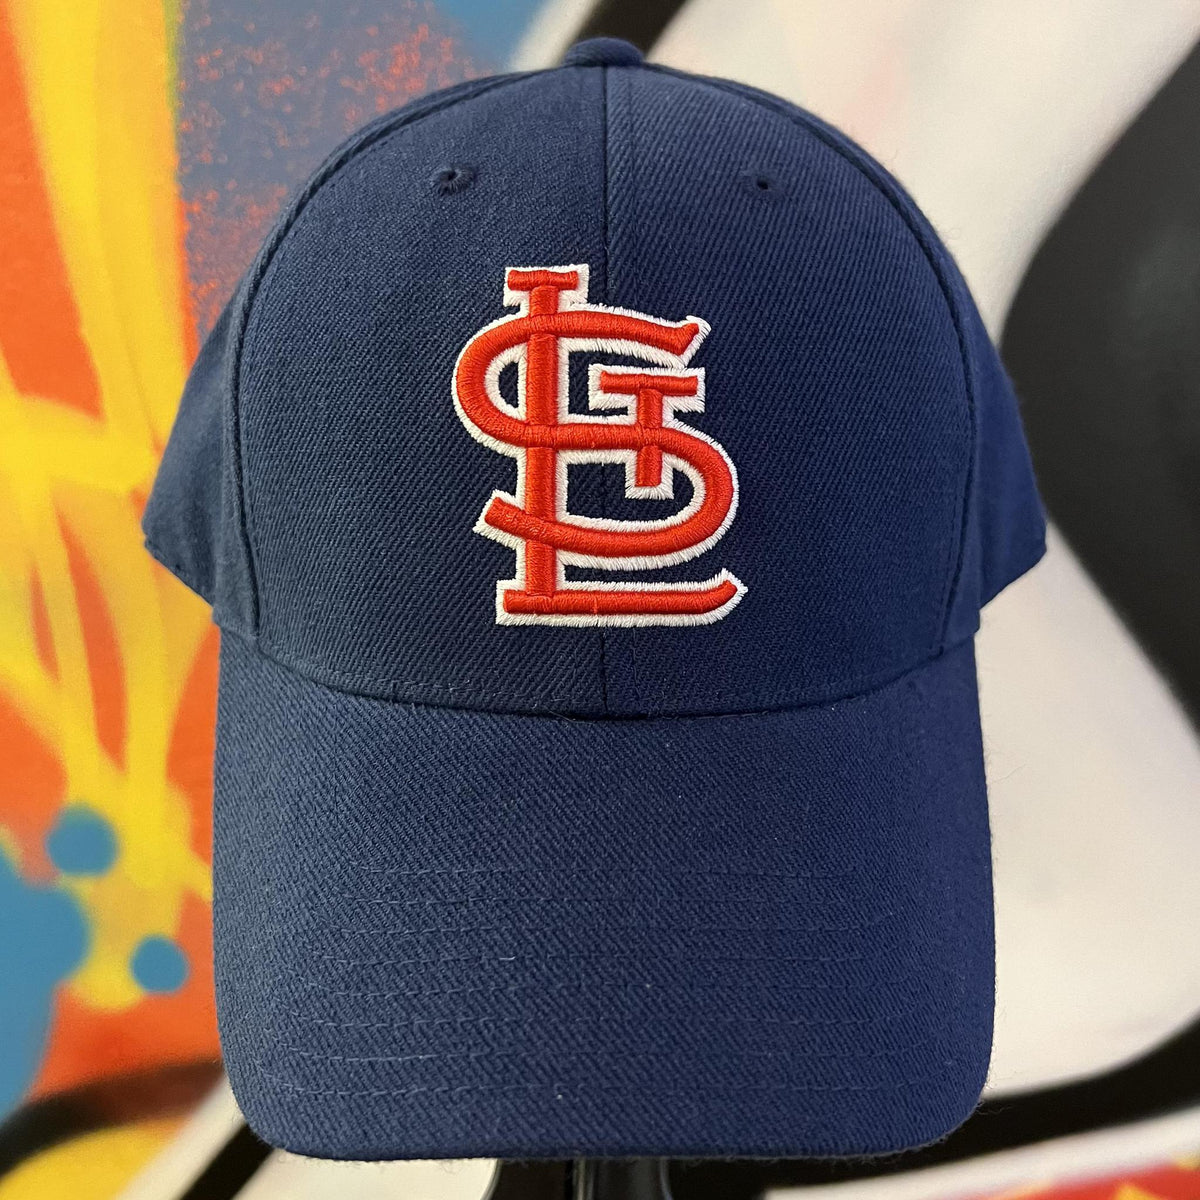 MLB Americana St. Louis Cardinals 59FIFTY Fitted Cap D02_456